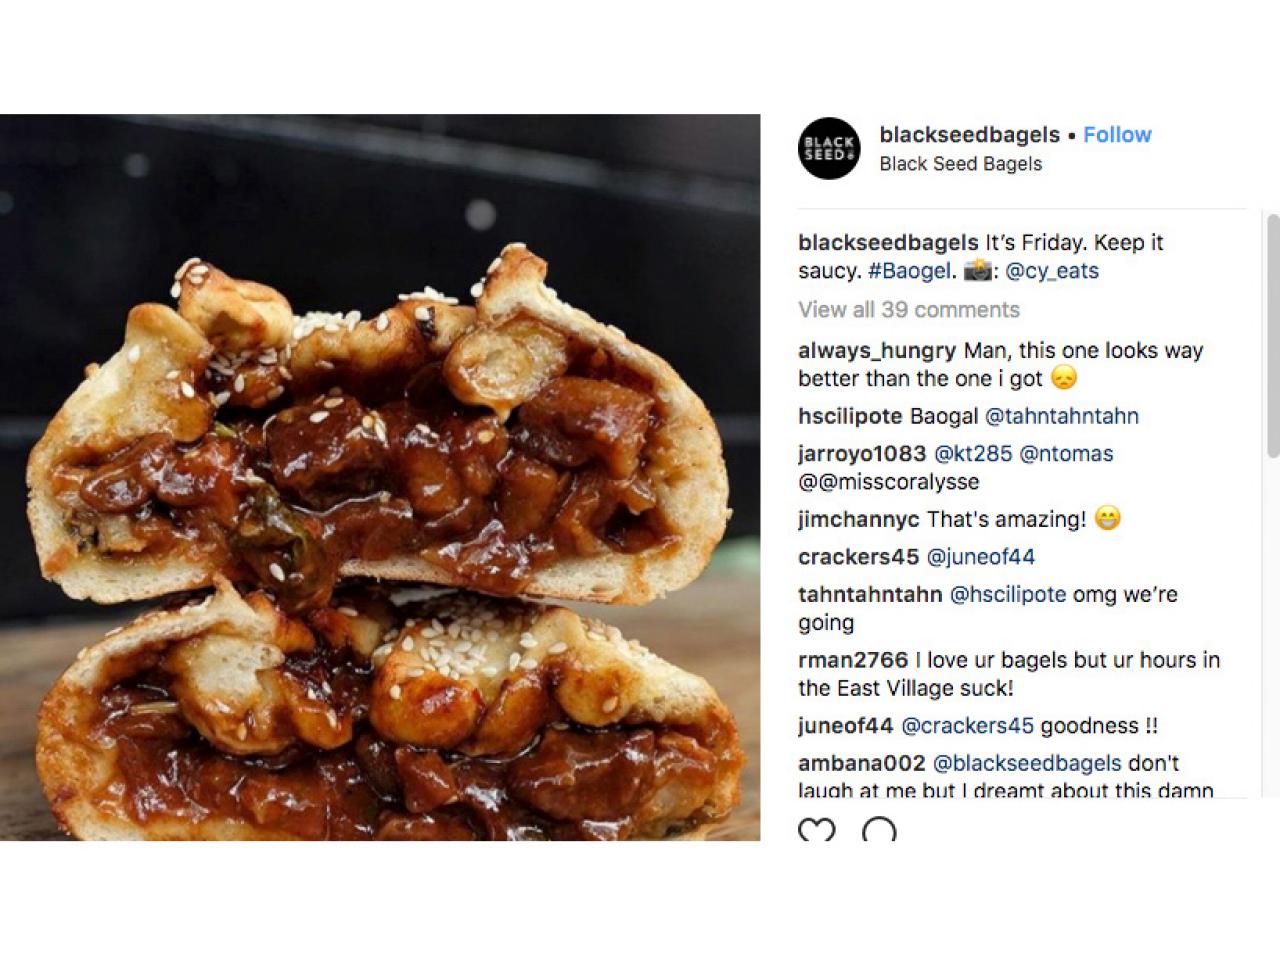 This restaurant is churning out the most Instagram-worthy dishes in NYC